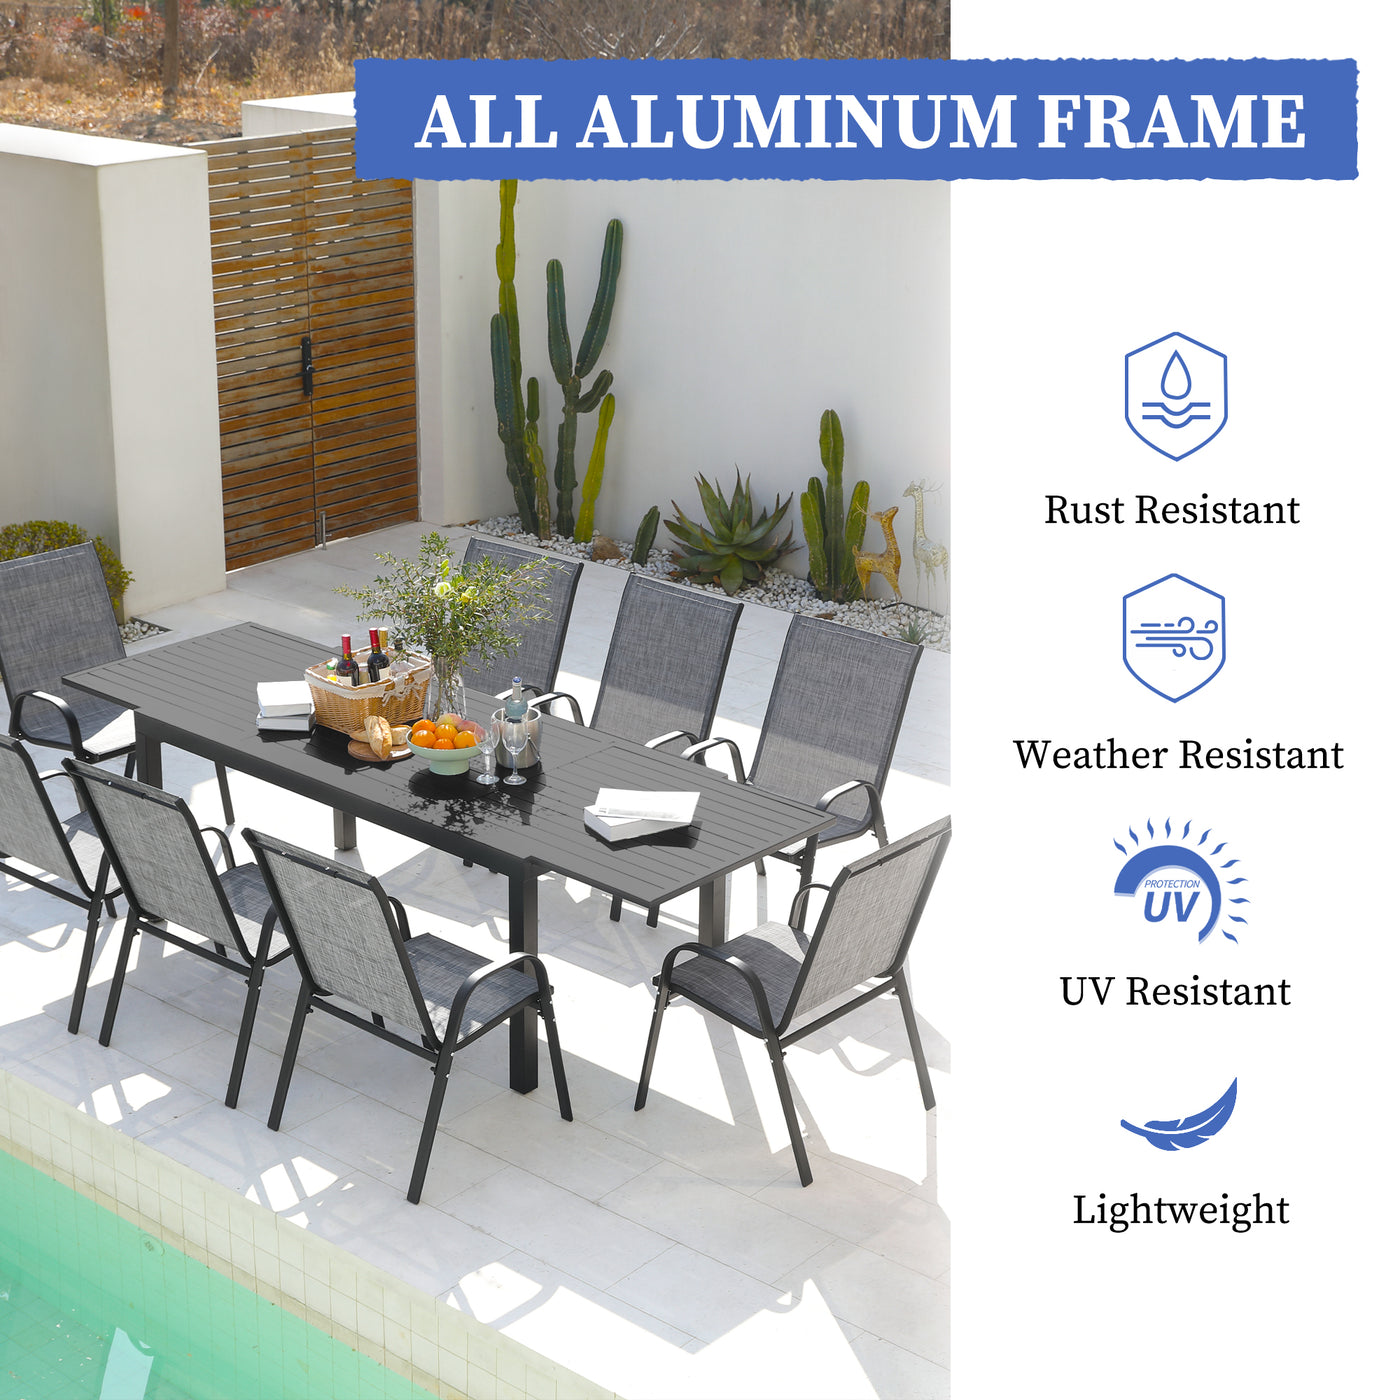 Pizzello Aluminum Patio Extendable Dining Table with aluminum frames, advertised as rust-resistant, weather-resistant, UV-resistant, and lightweight.